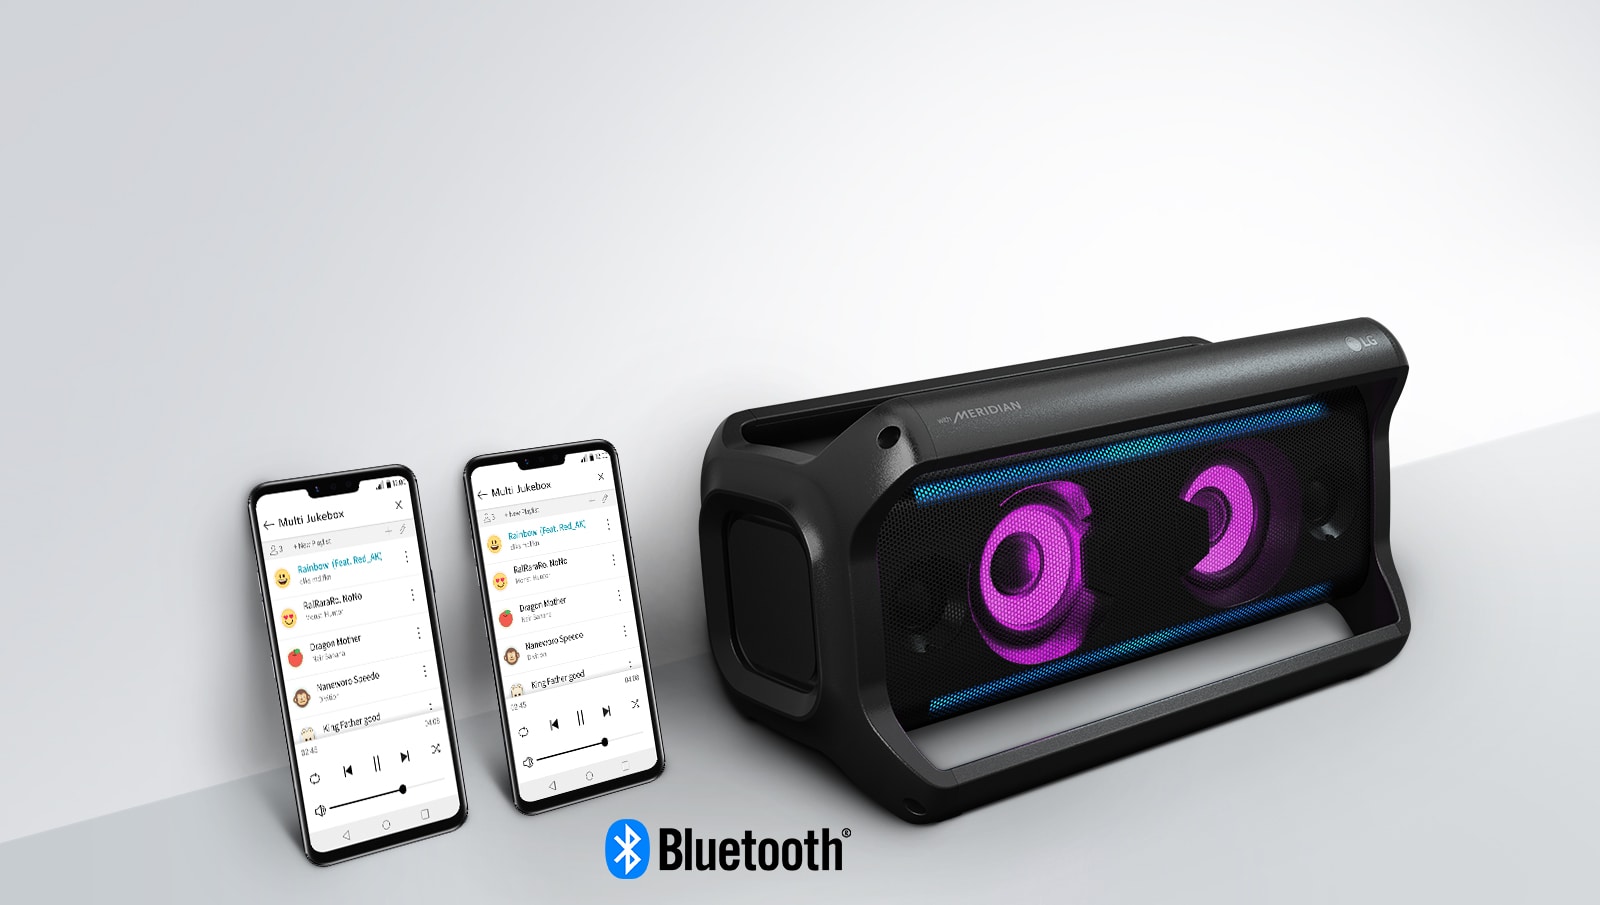 Share the Playlist with Multi Bluetooth1